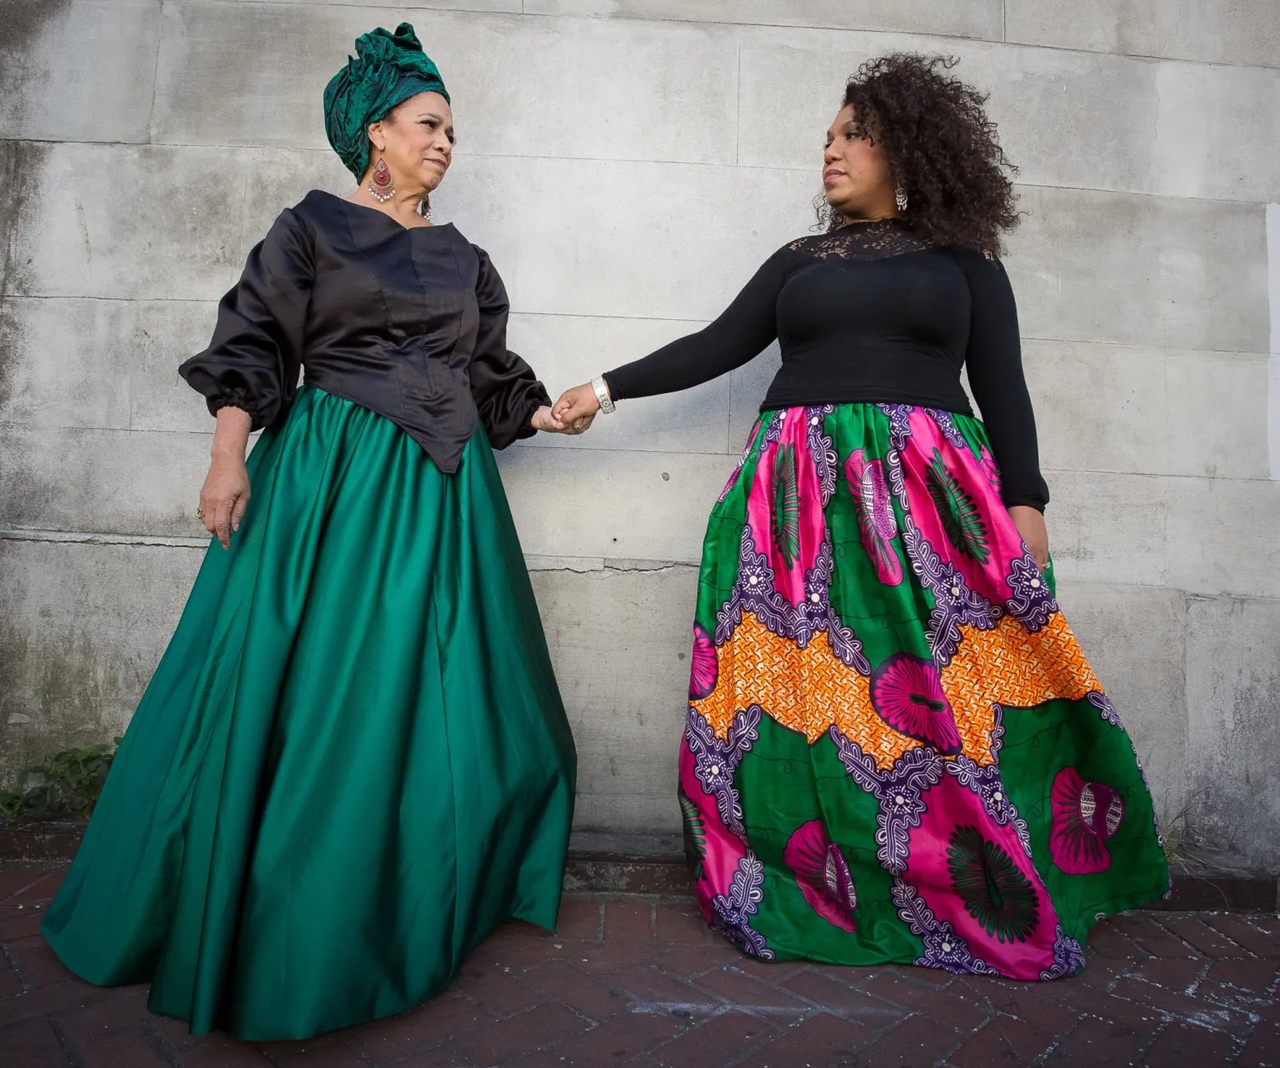 Mother-daughter opera singers Givonna Joseph (left) and Aria Mason (right) founded OperaCreole in 2011 to stage the forgotten works of New Orleans’s Creole composers of color.